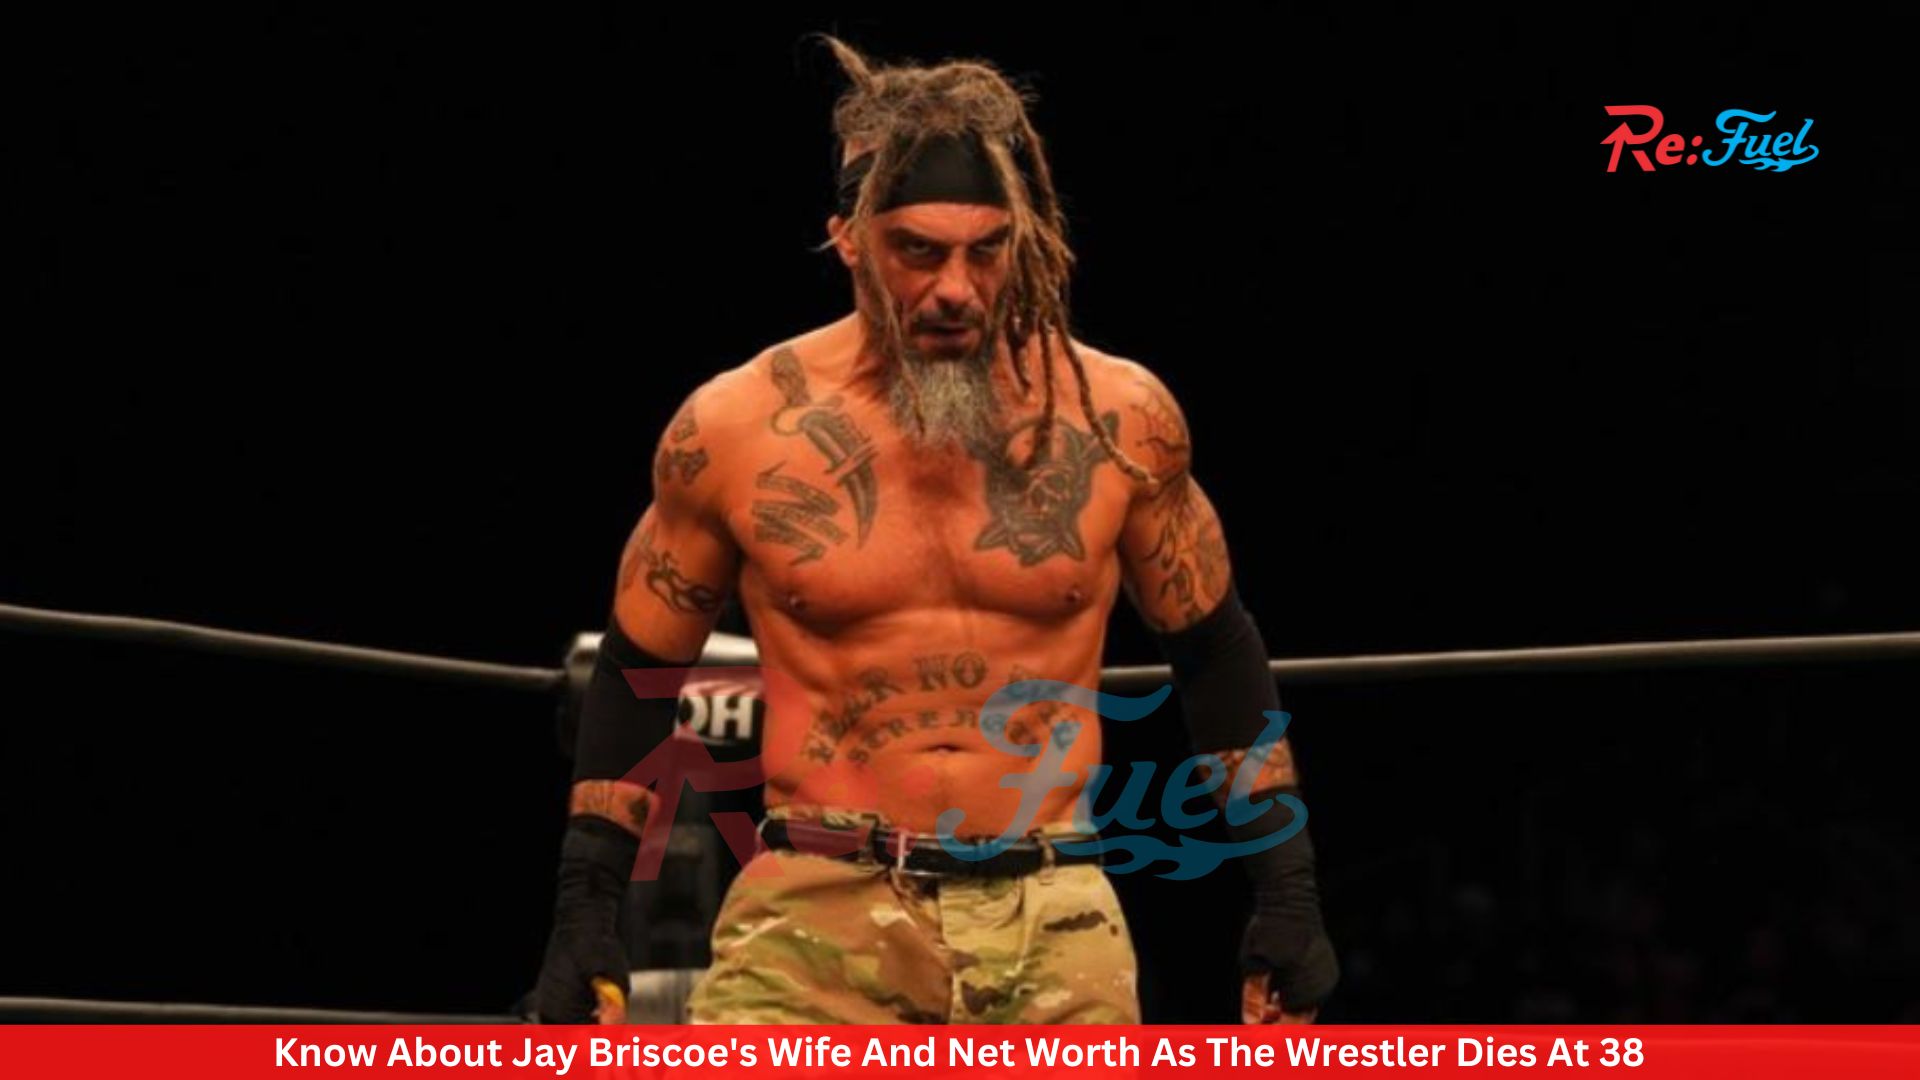 Know About Jay Briscoe's Wife And Net Worth As The Wrestler Dies At 38